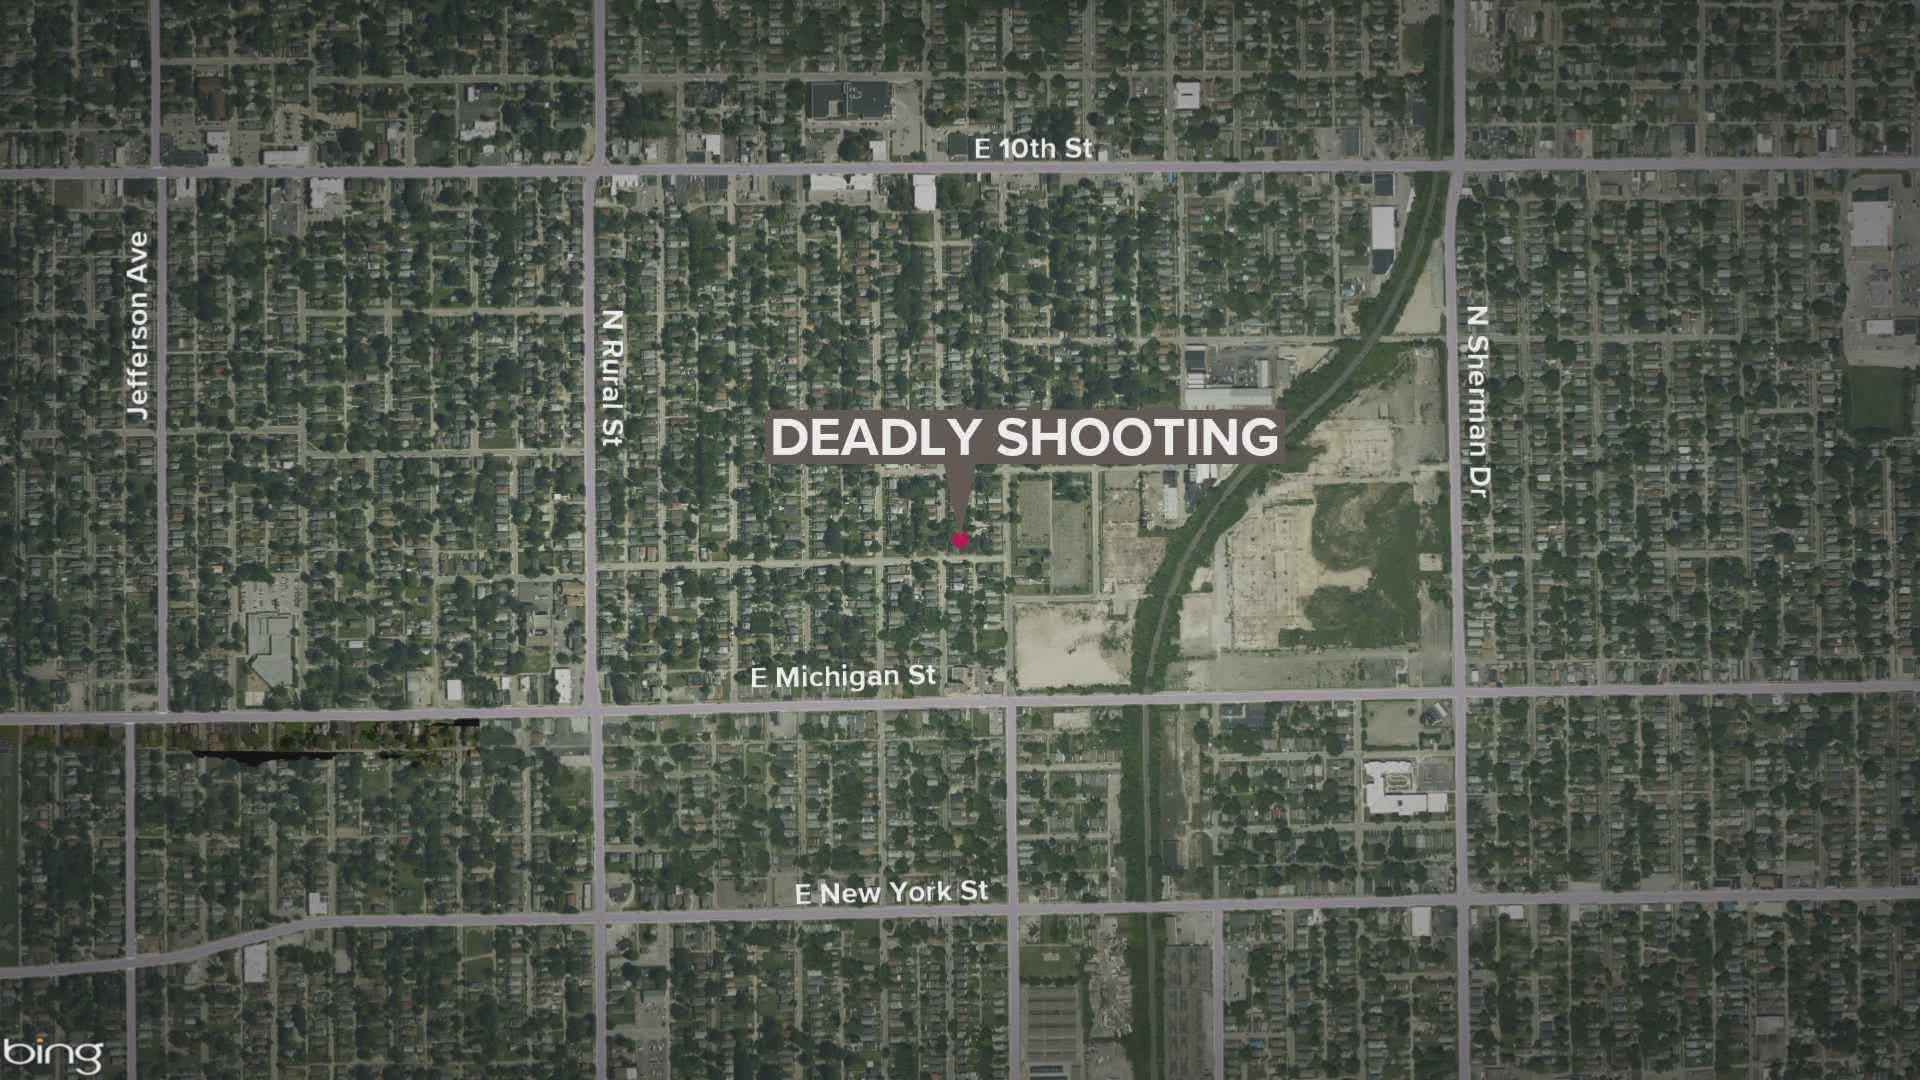 Metro Police detectives are investigating several weekend shootings that left at least one man dead.